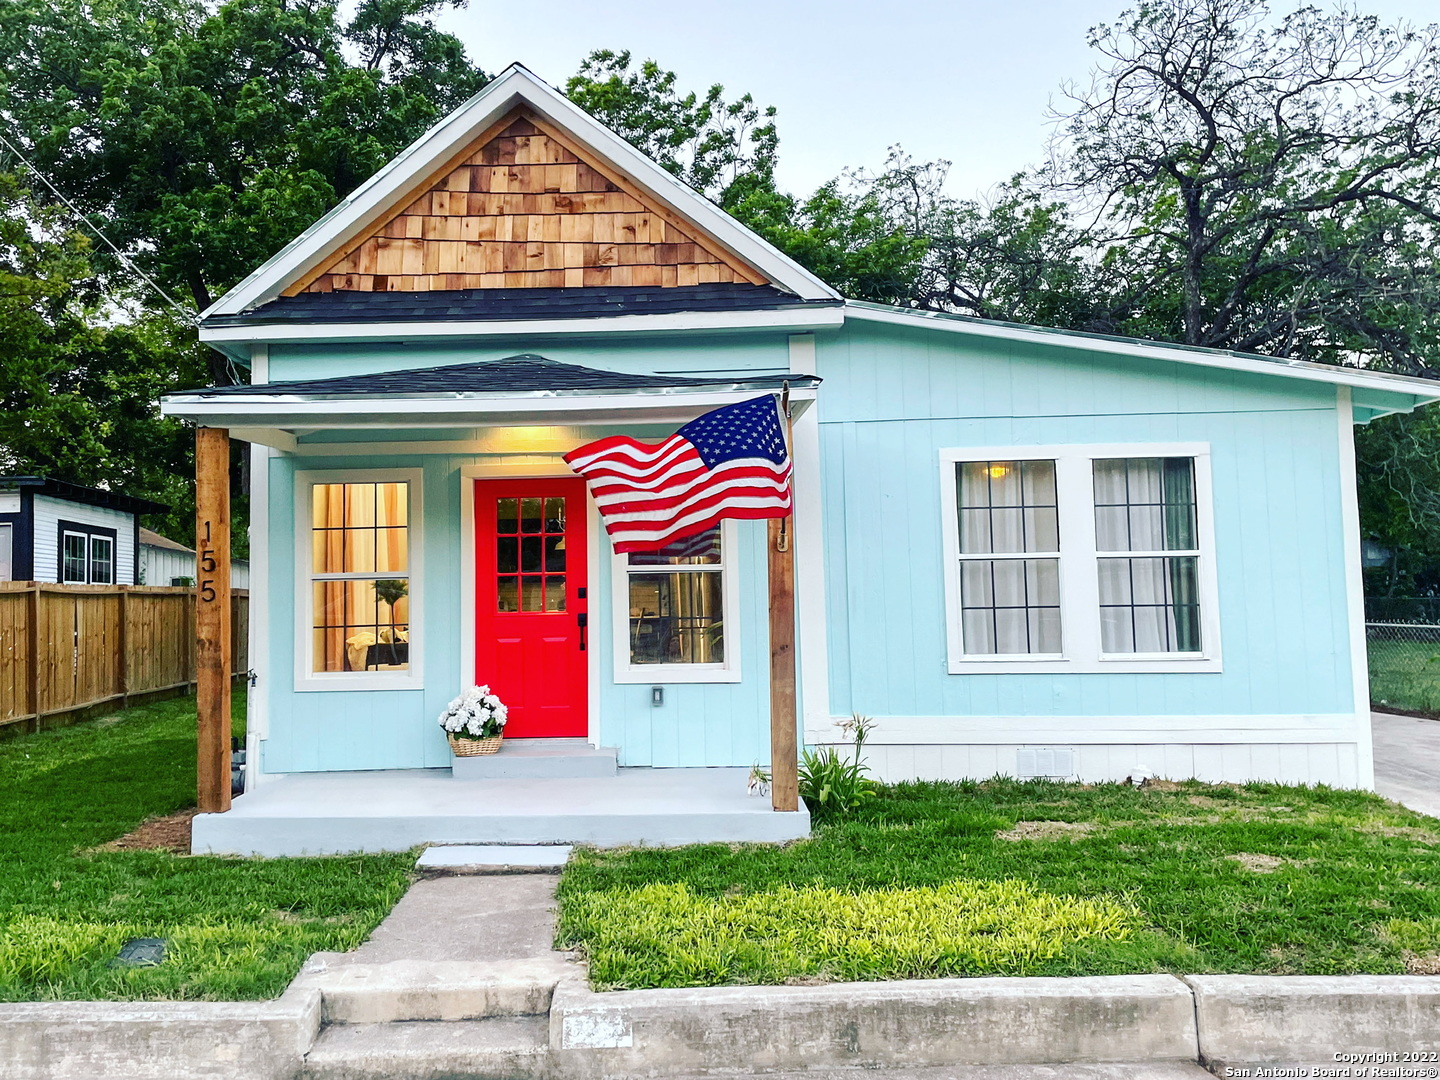 Own a piece of history without the headache!  This 108-year-old property has been restored to its former glory in the trendy Lone Star district.  Within walking distance of Southtown and King William, you're able to explore entertainment options, or relax on a quiet street full of families.  Tripp Flip LLC won a pair of prestigious 2022 San Antonio Magazine awards for historic preservation, and they've done it again at 155 Oelkers.  Outside, this home features a new foundation, a new roof, and new landscaping.  On the inside, you can move in stress-free thanks to new plumbing, new electrical wiring, and a new HVAC system.  All of this work has been permitted by the city of San Antonio.  The main house features more than 1200 square feet, including three bedrooms and two full bathrooms.  Walking in the front door, you're greeted by 12-foot ceilings and a wide open floor plan.  The living room features plenty of natural light, and flows flawlessly into the dining room.  The kitchen is a highlight of the home, with new marble countertops, new appliances, and new cabinets.  There is also an adorable coffee bar off the kitchen, which doubles as a walk-in pantry.  The primary suite features a custom closet, along with lots of natural sunlight.  The primary bathroom is attached, and features a standalone tub surrounded by floor-to-ceiling tile, complete with a rainfall shower head.  The floating double vanity boasts marble countertops.  The guest bathroom showcases a new vanity, gorgeous walk-in shower, and lots of extra space to take advantage of.  This bathroom is well located for entertaining, or hosting guests, positioned right off the kitchen, and near the back two bedrooms.  The mud room hallway and utility space off the side door are conveniently located for everyday living.  Hang your coat when you walk in, drop your dirty clothes at the end of the hall, and recharge.  The back two bedrooms also have easy access to the utility space, and feature large windows and closets.  Outside, you'll find our cute casita, which features a full bedroom and bathroom inside.  There is also a kitchenette, with a new range, microwave and refrigerator.  This is a tremendous flex space for your family!  Use it as a getaway for yourselves, a separate guest space, or even rent it out for extra income.  The possibilities are up to you!  Another unique feature of this property is the 3-car carport attached by the roof of the home.  There is plenty of room for 5-6 cars to park off the street, as well as a covered patio next to the spacious backyard oasis.  It's an incredible space for entertaining without having to leave home.    This street has seen plenty of recent renovation due to its quiet nature, combined with its proximity to trendy areas of San Antonio.  Get in to see 155 Oelkers before the secret gets out!  Welcome home!